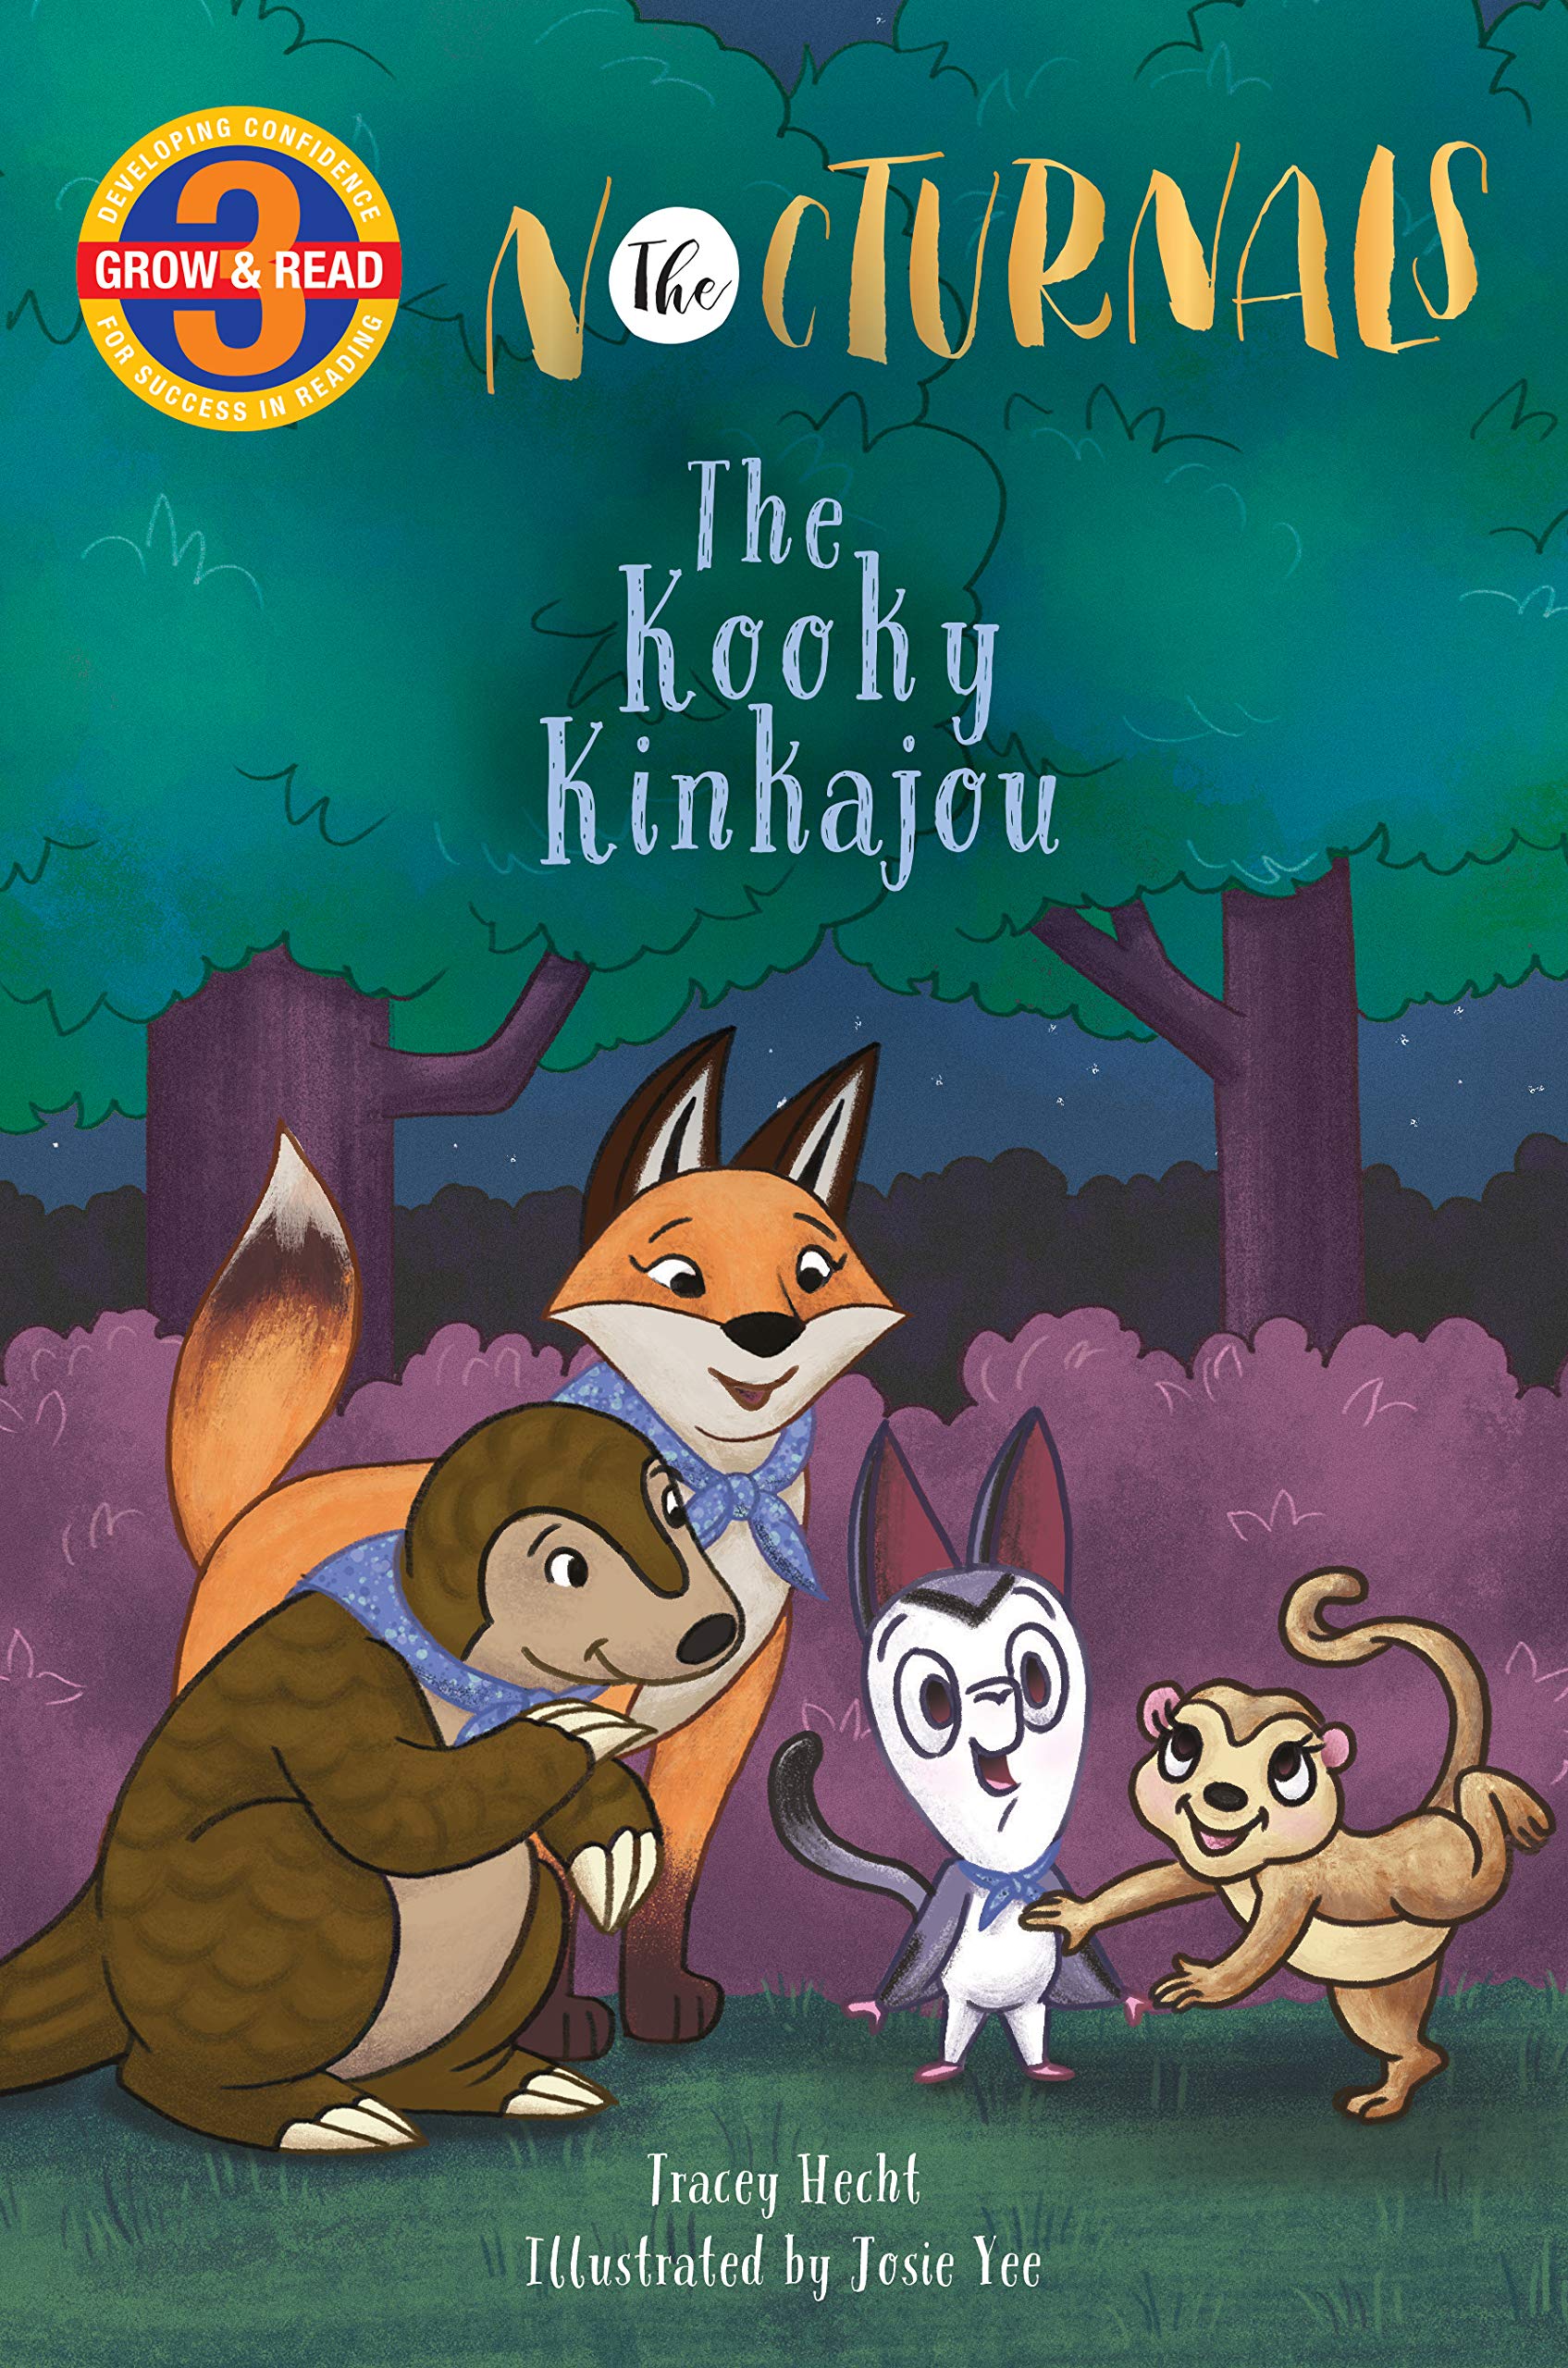 The Kooky Kinkajou: The Nocturnals (Grow & Read Early Reader, Level 3)